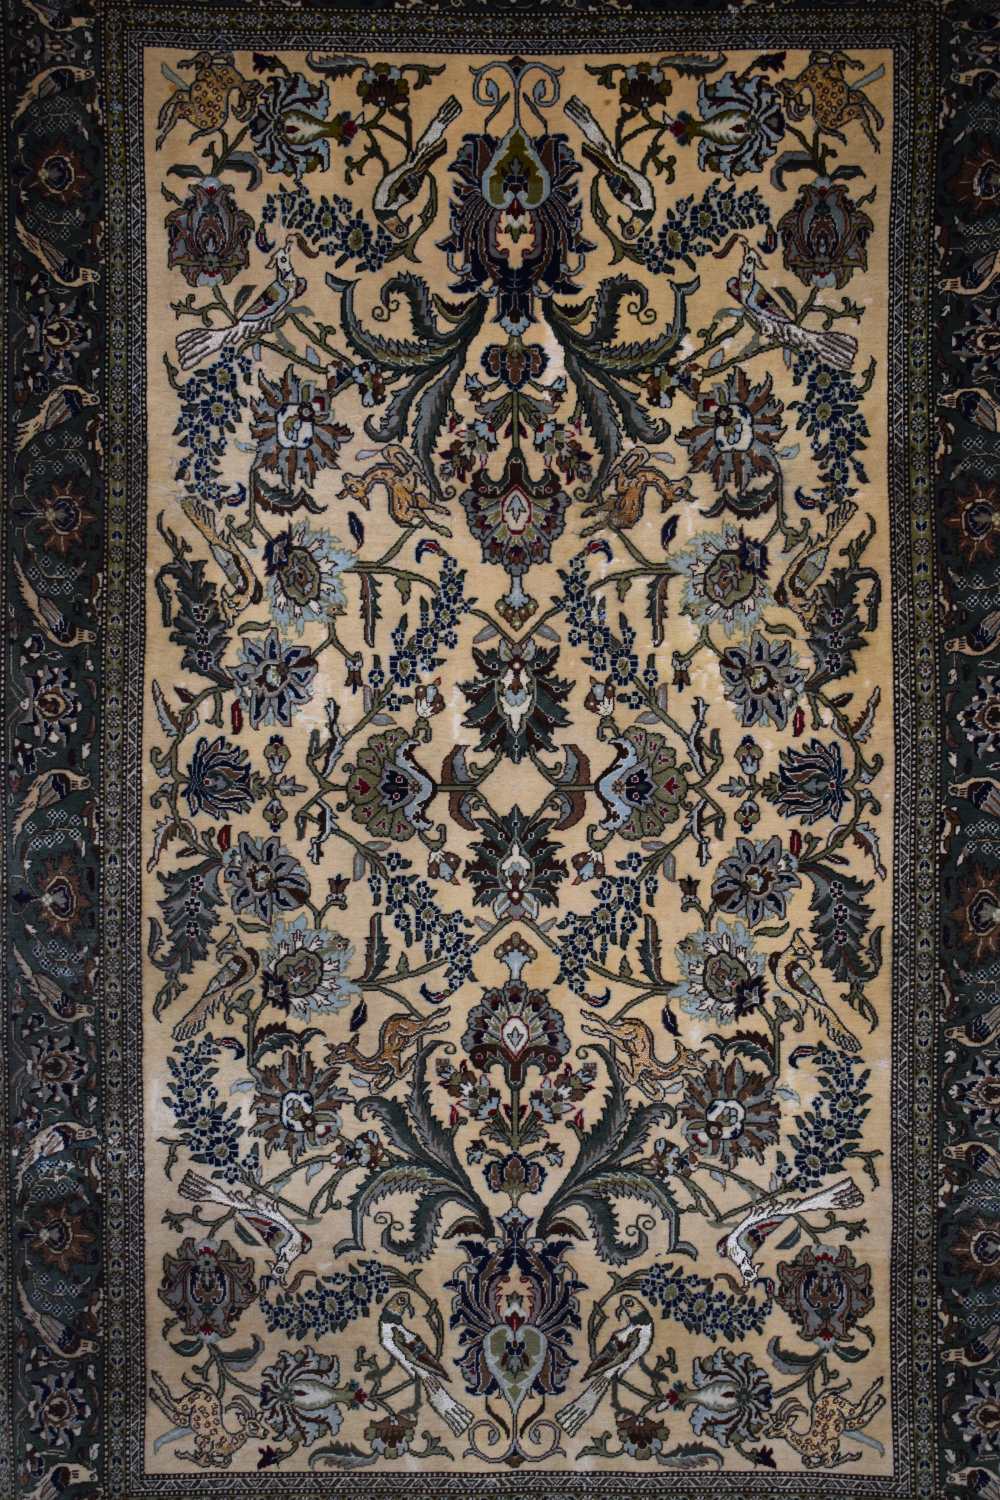 Qum part silk rug, south central Persia, mid-20th century, 6ft. 11in. X 4ft. 5in. 2.11m. X 1.35m. - Image 9 of 13